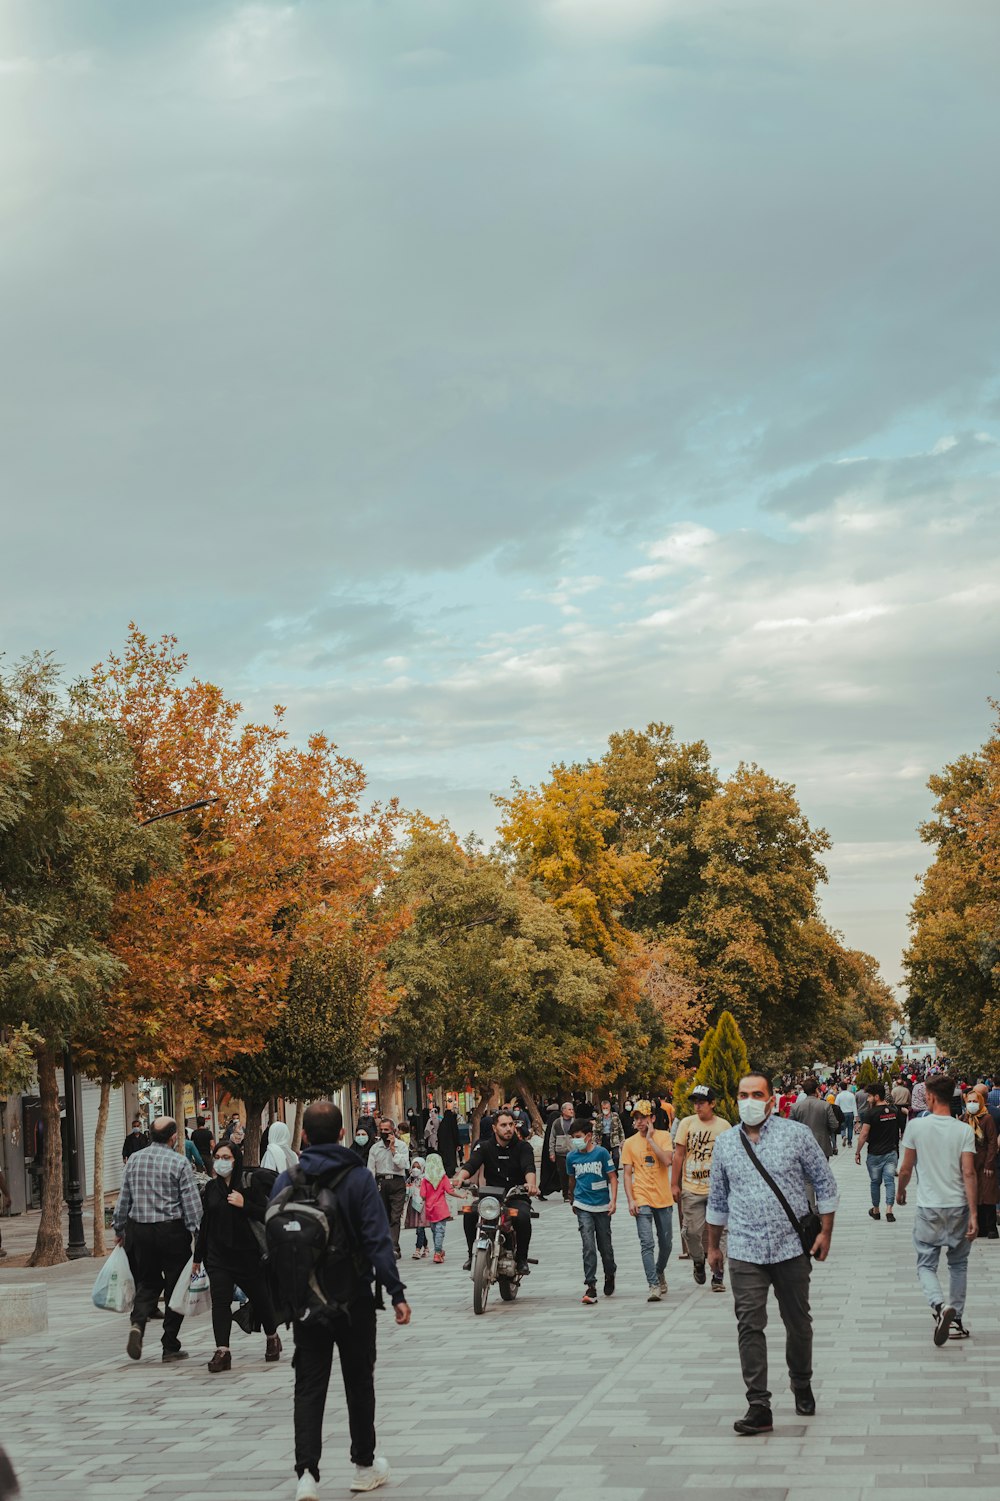 a crowd of people walking down a sidewalk next to trees